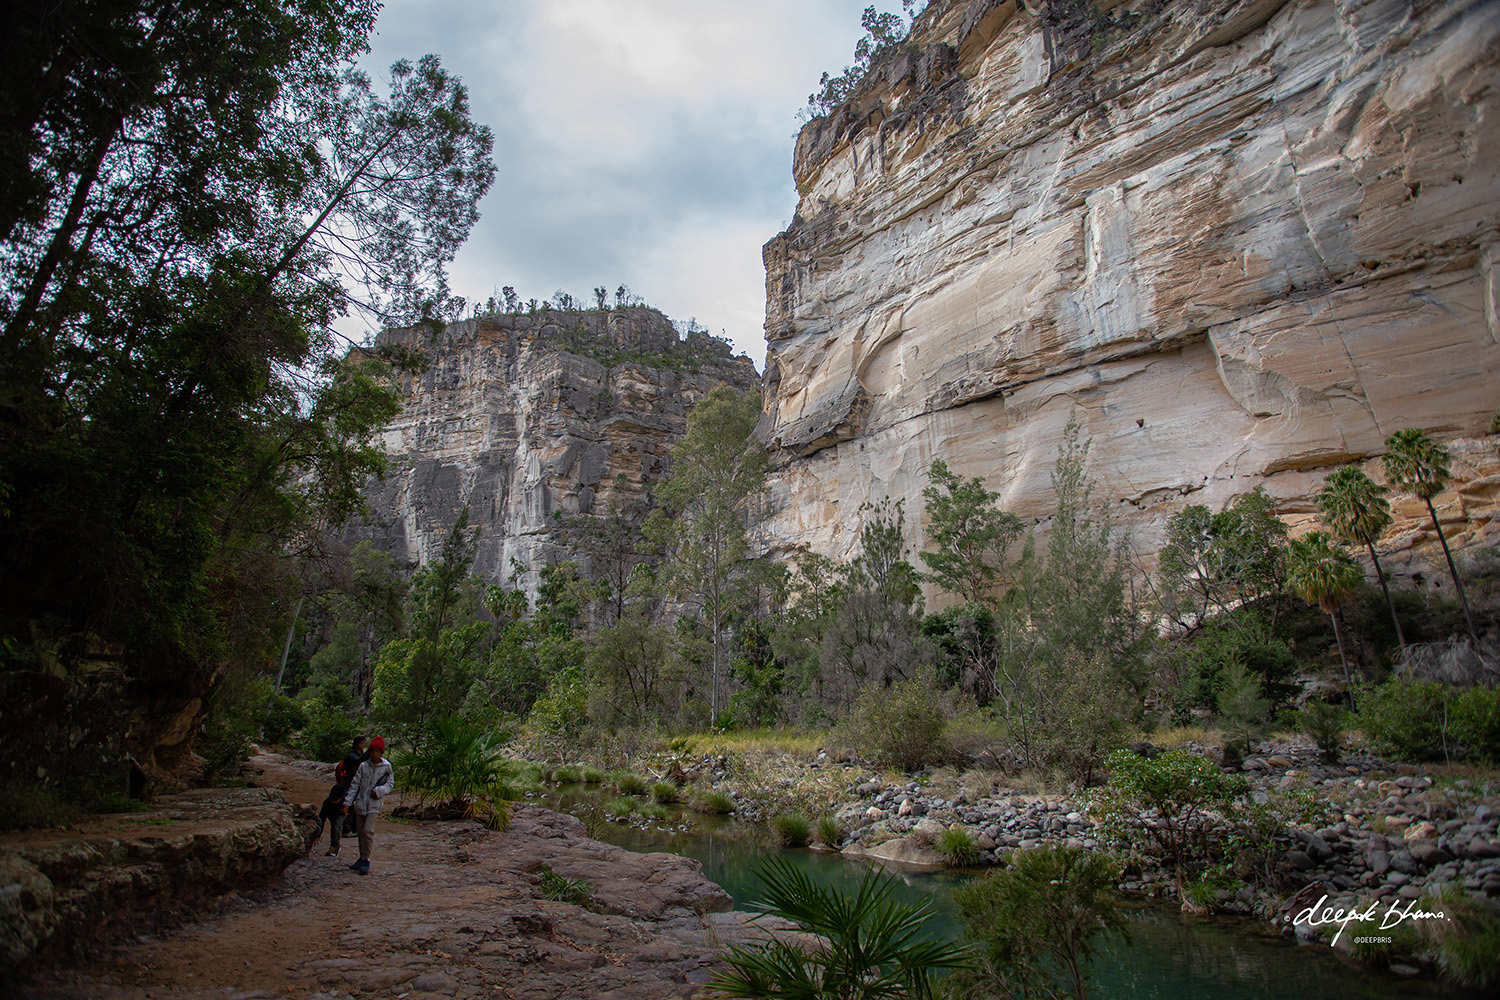 Carnarvon Gorge with kids - kids walking through the gorge along the river